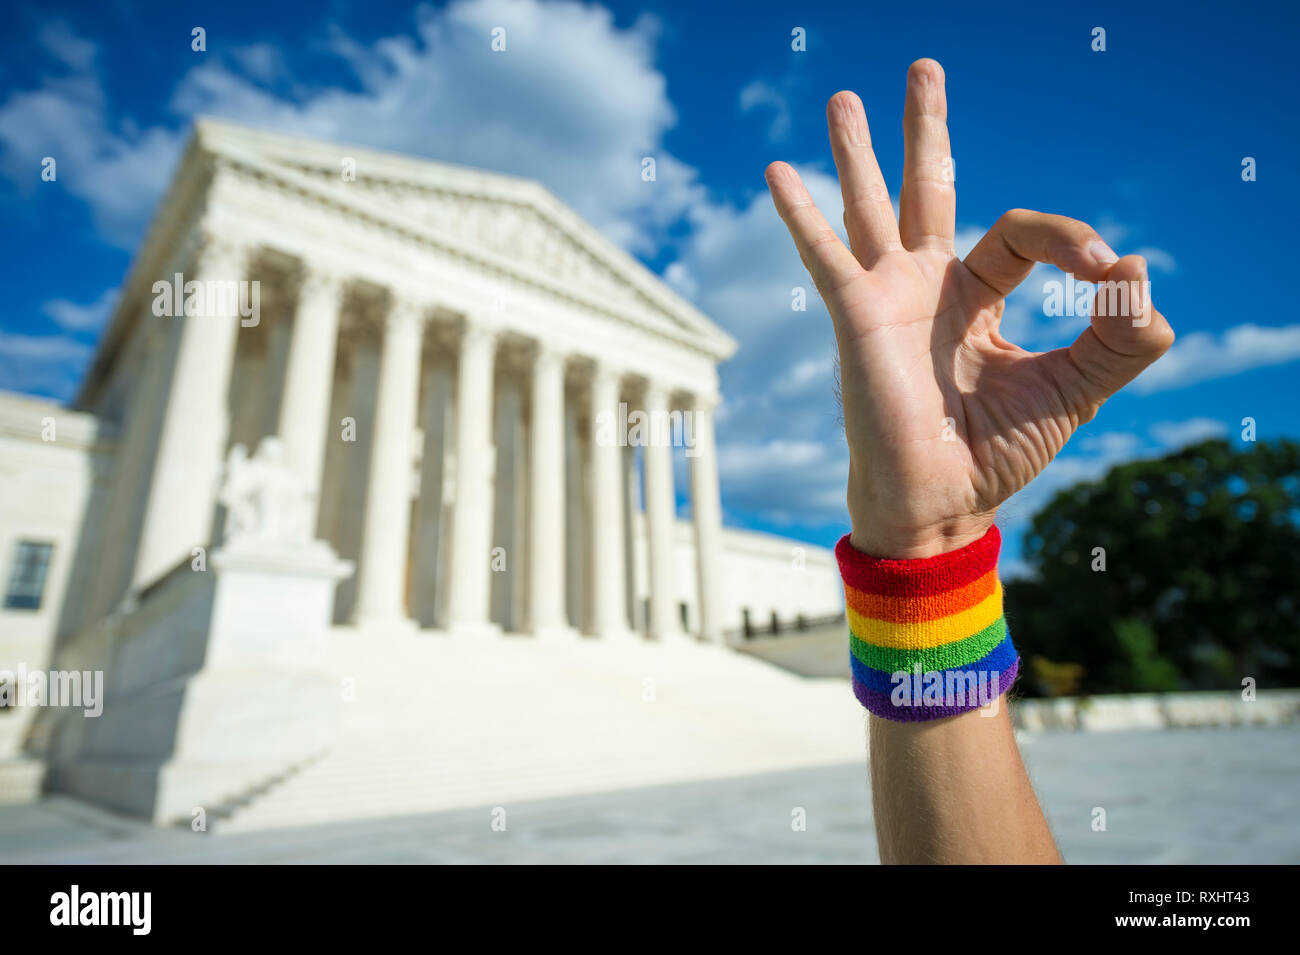 Hand wearing gay pride rainbow wristband making okay gesture outside the Supreme Court building in Washington, DC, USA Stock Photo